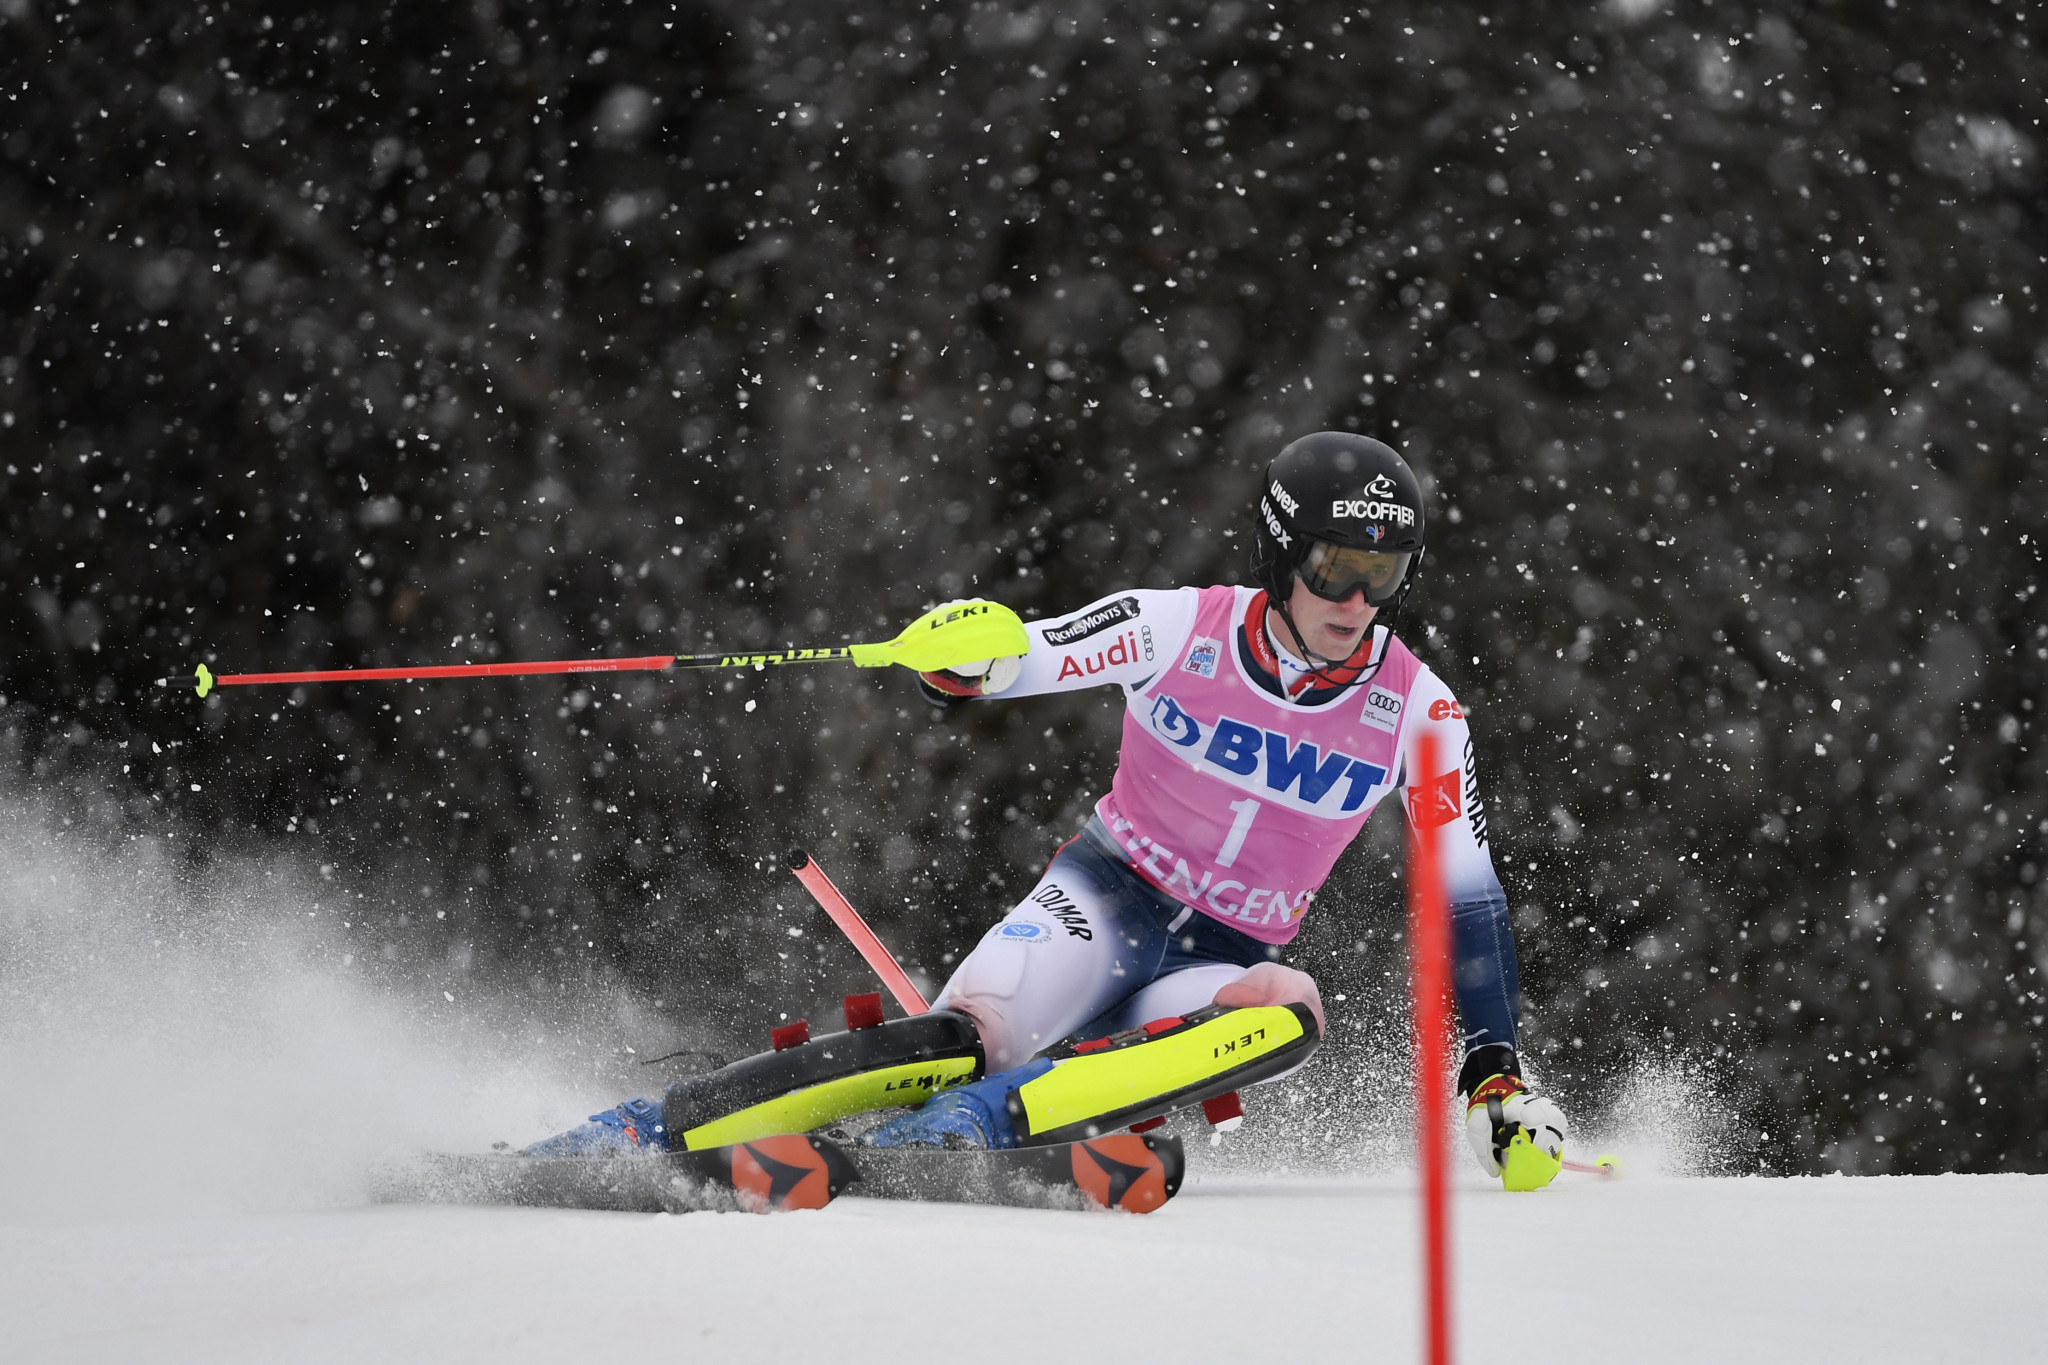 Clément Noël will aim for back-to-back slalom victories in Kitzbühel ©Getty Images